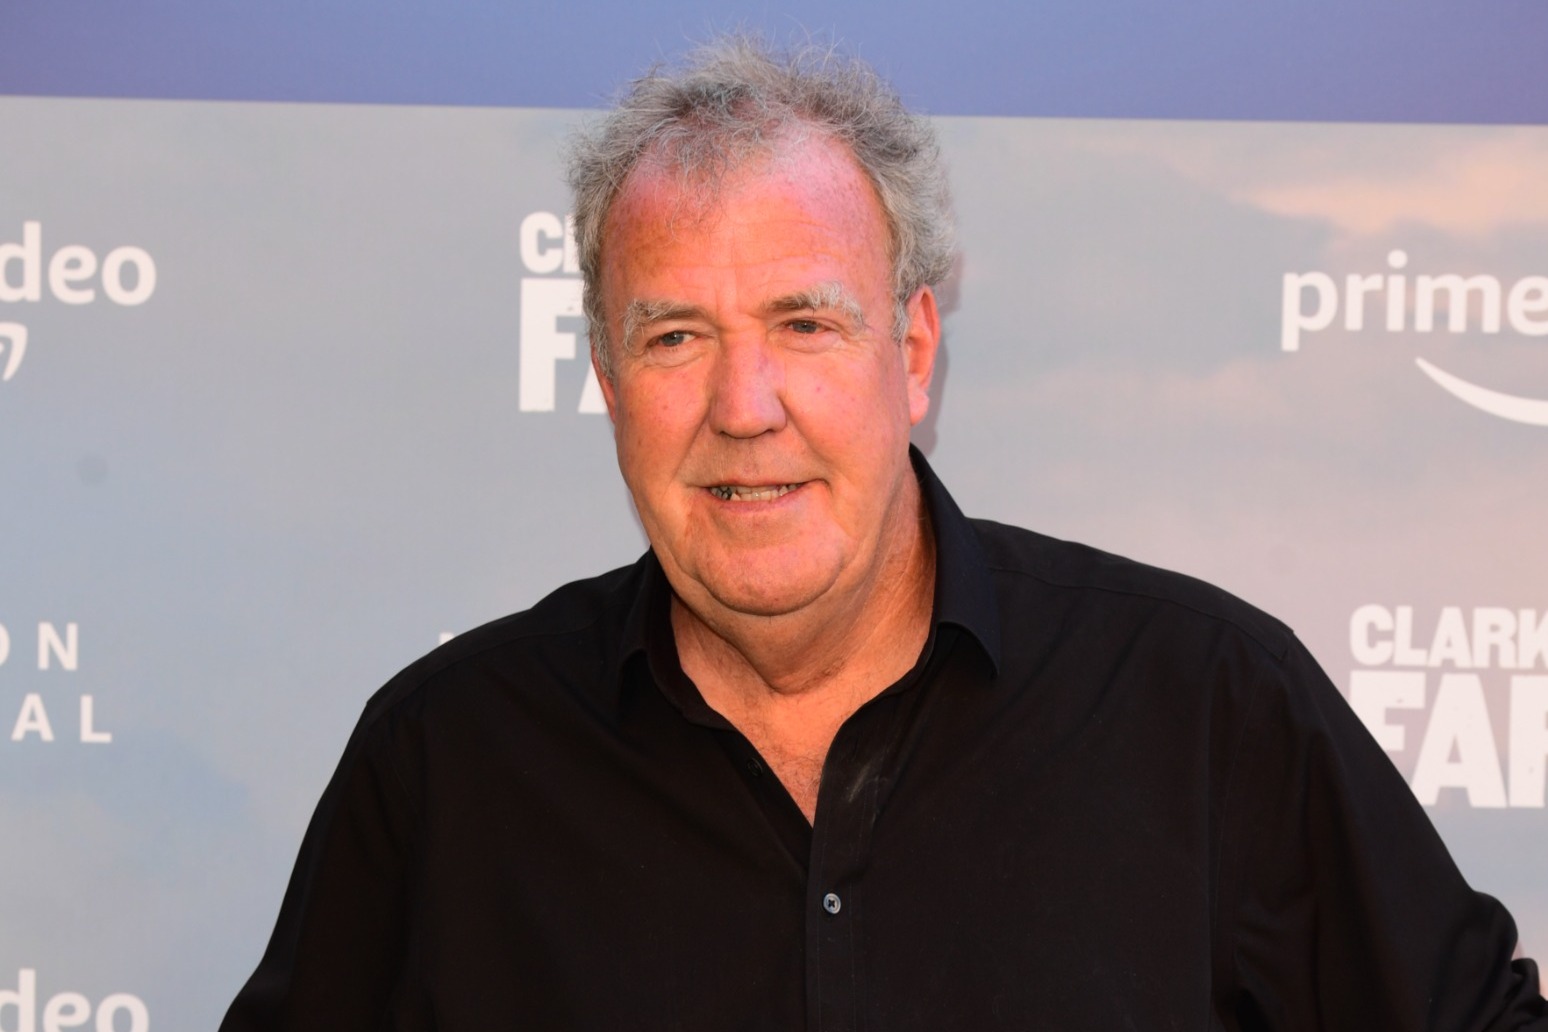 Jeremy Clarkson ‘horrified’ over hurt caused by article about Duchess of Sussex 